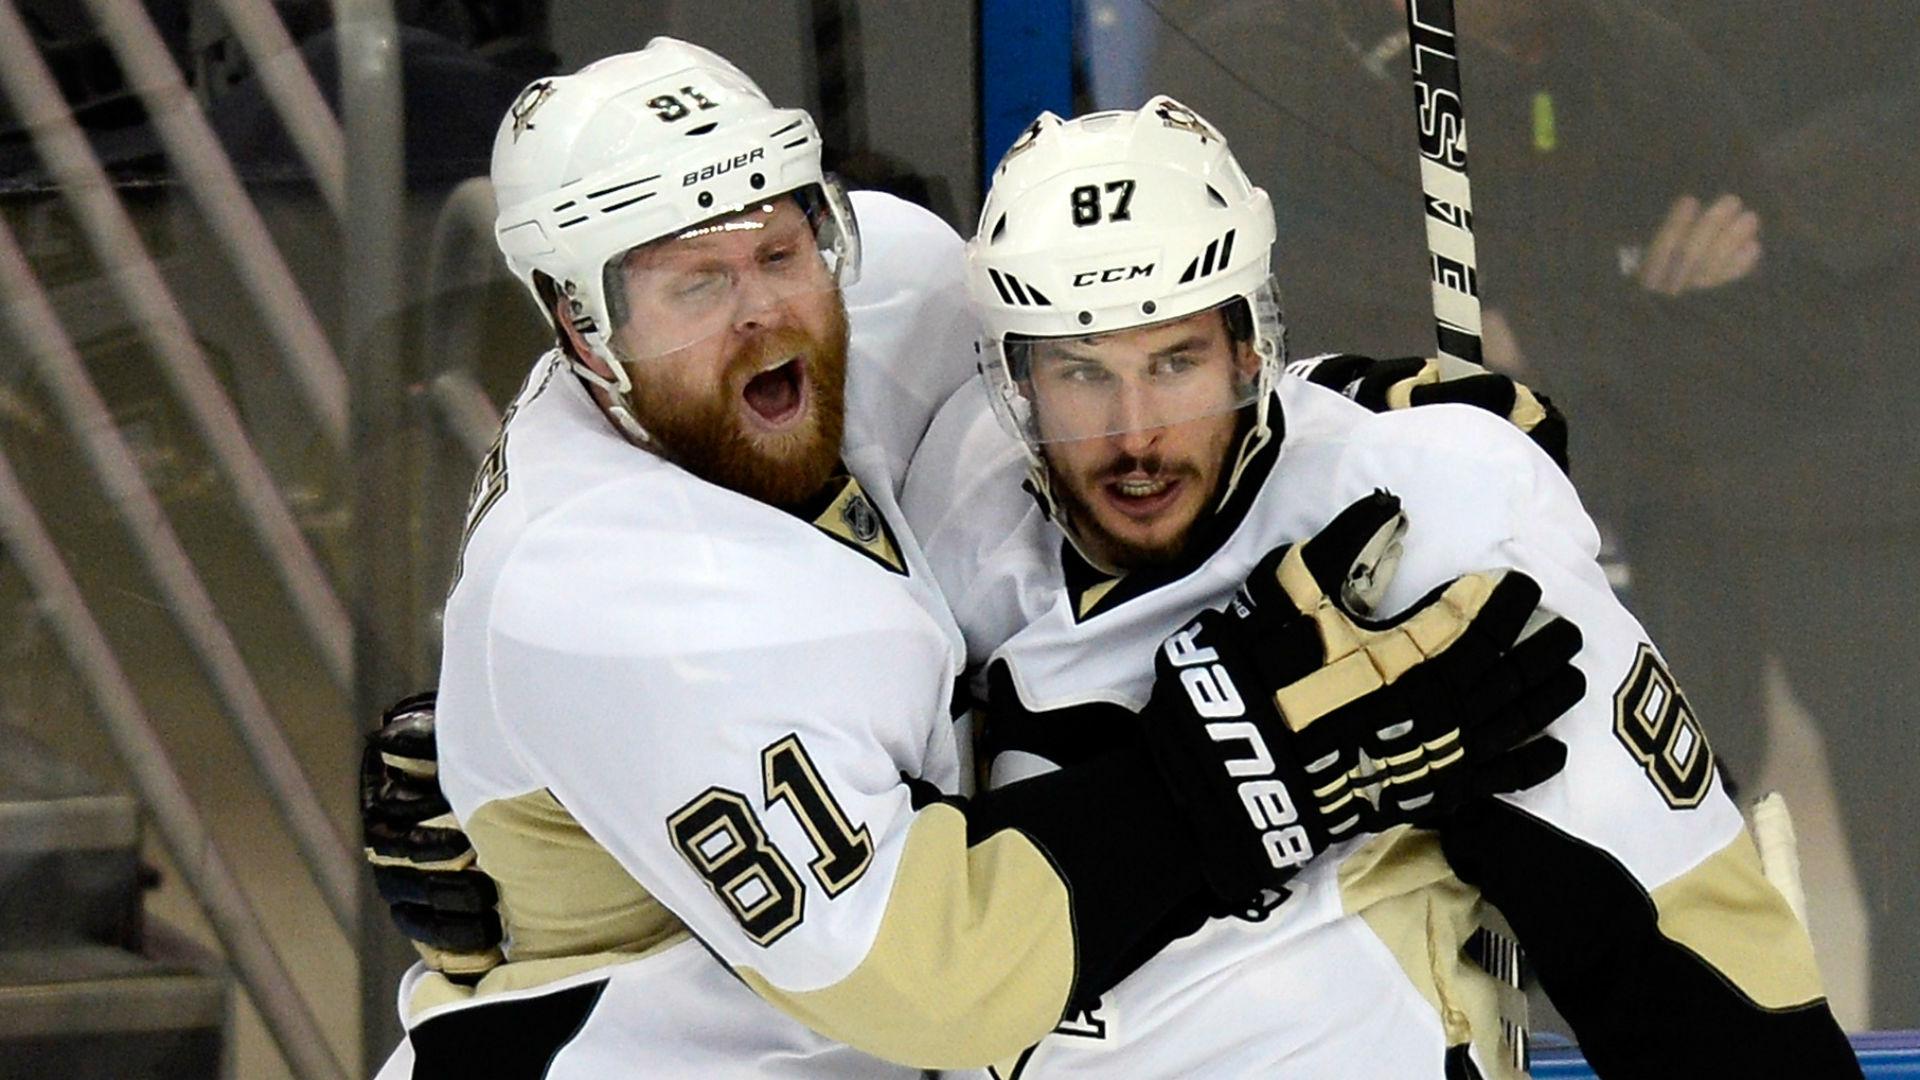 Finally, Sidney Crosby and Phil Kessel get what they deserve. NHL